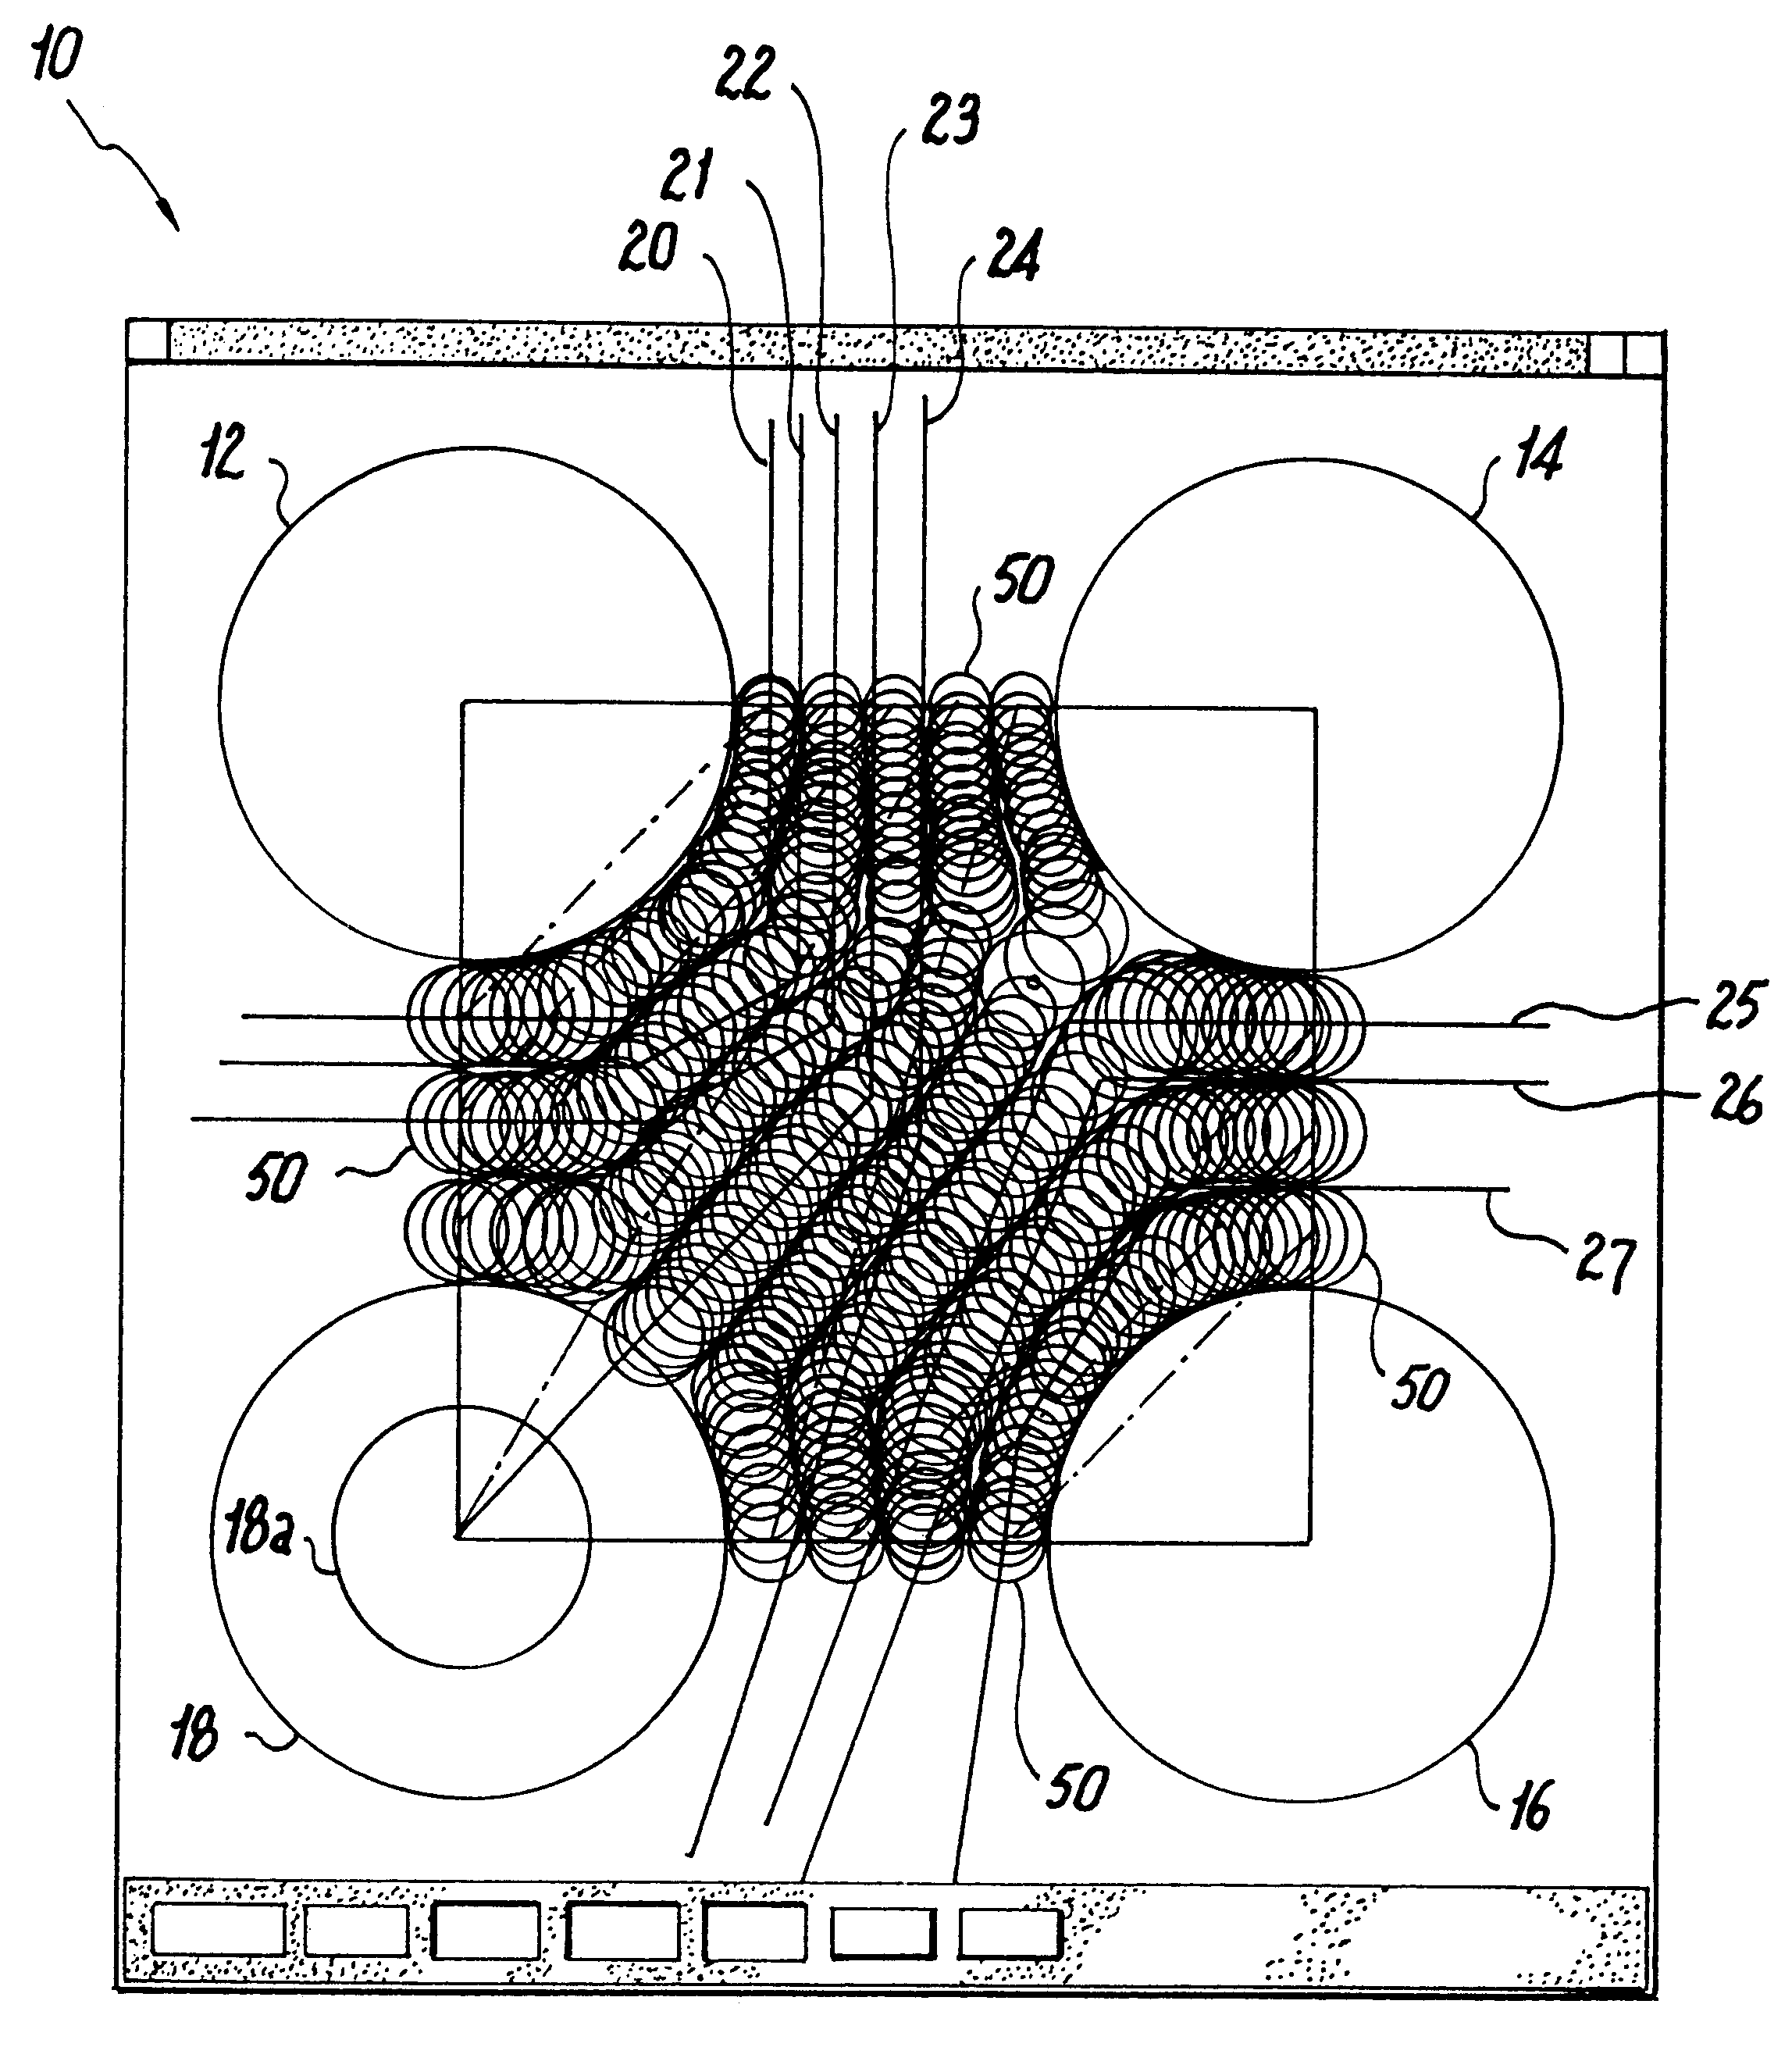 Optimization of printed wire circuitry on a single surface using a circle diameter